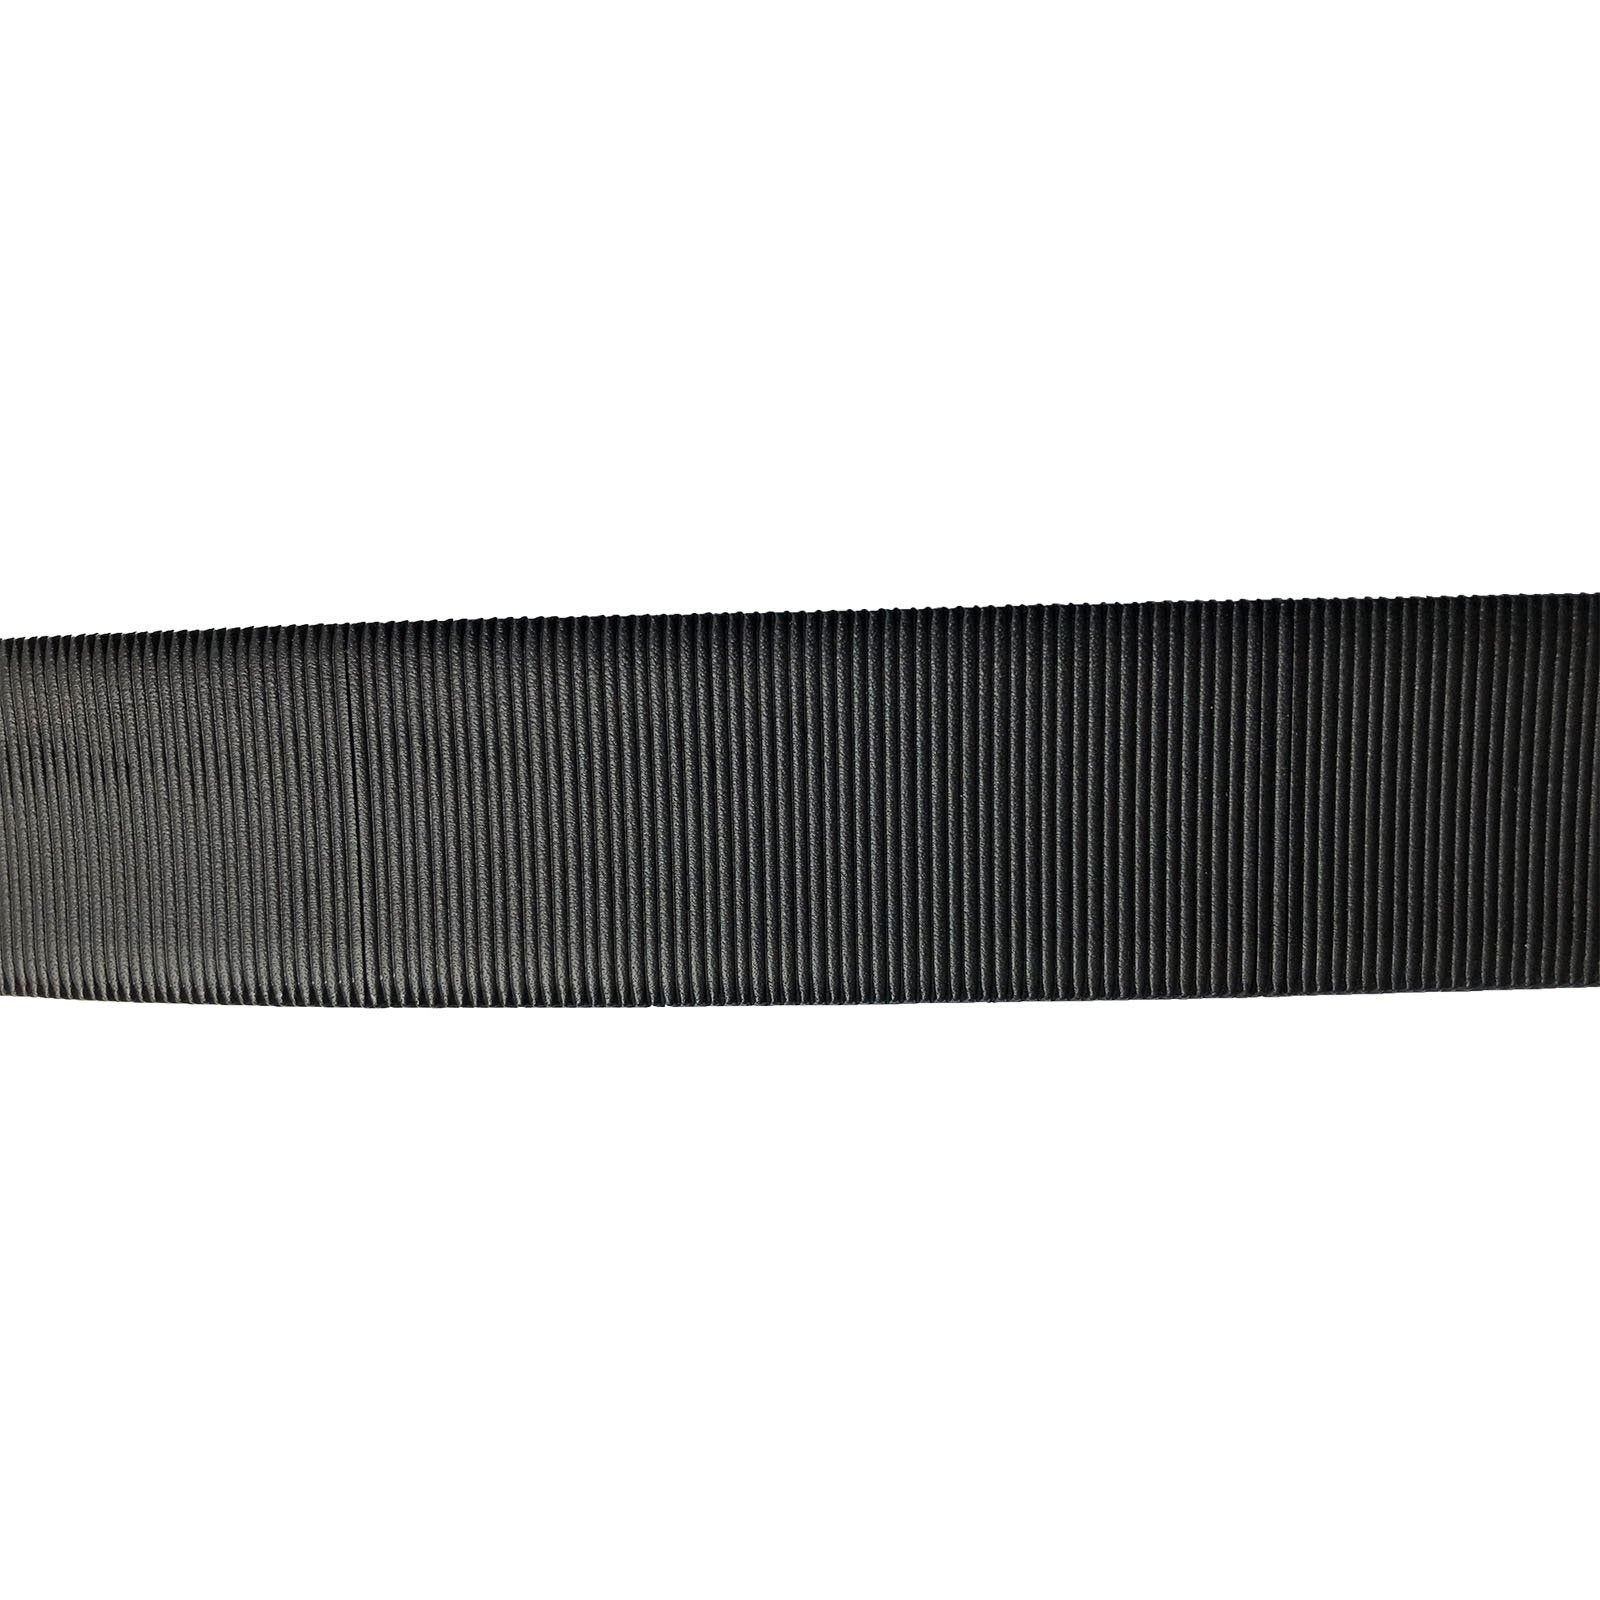 BLACK 35MM STRIPE EMBOSSED LEATHER BELT WITH A PLAQUE BUCKLE